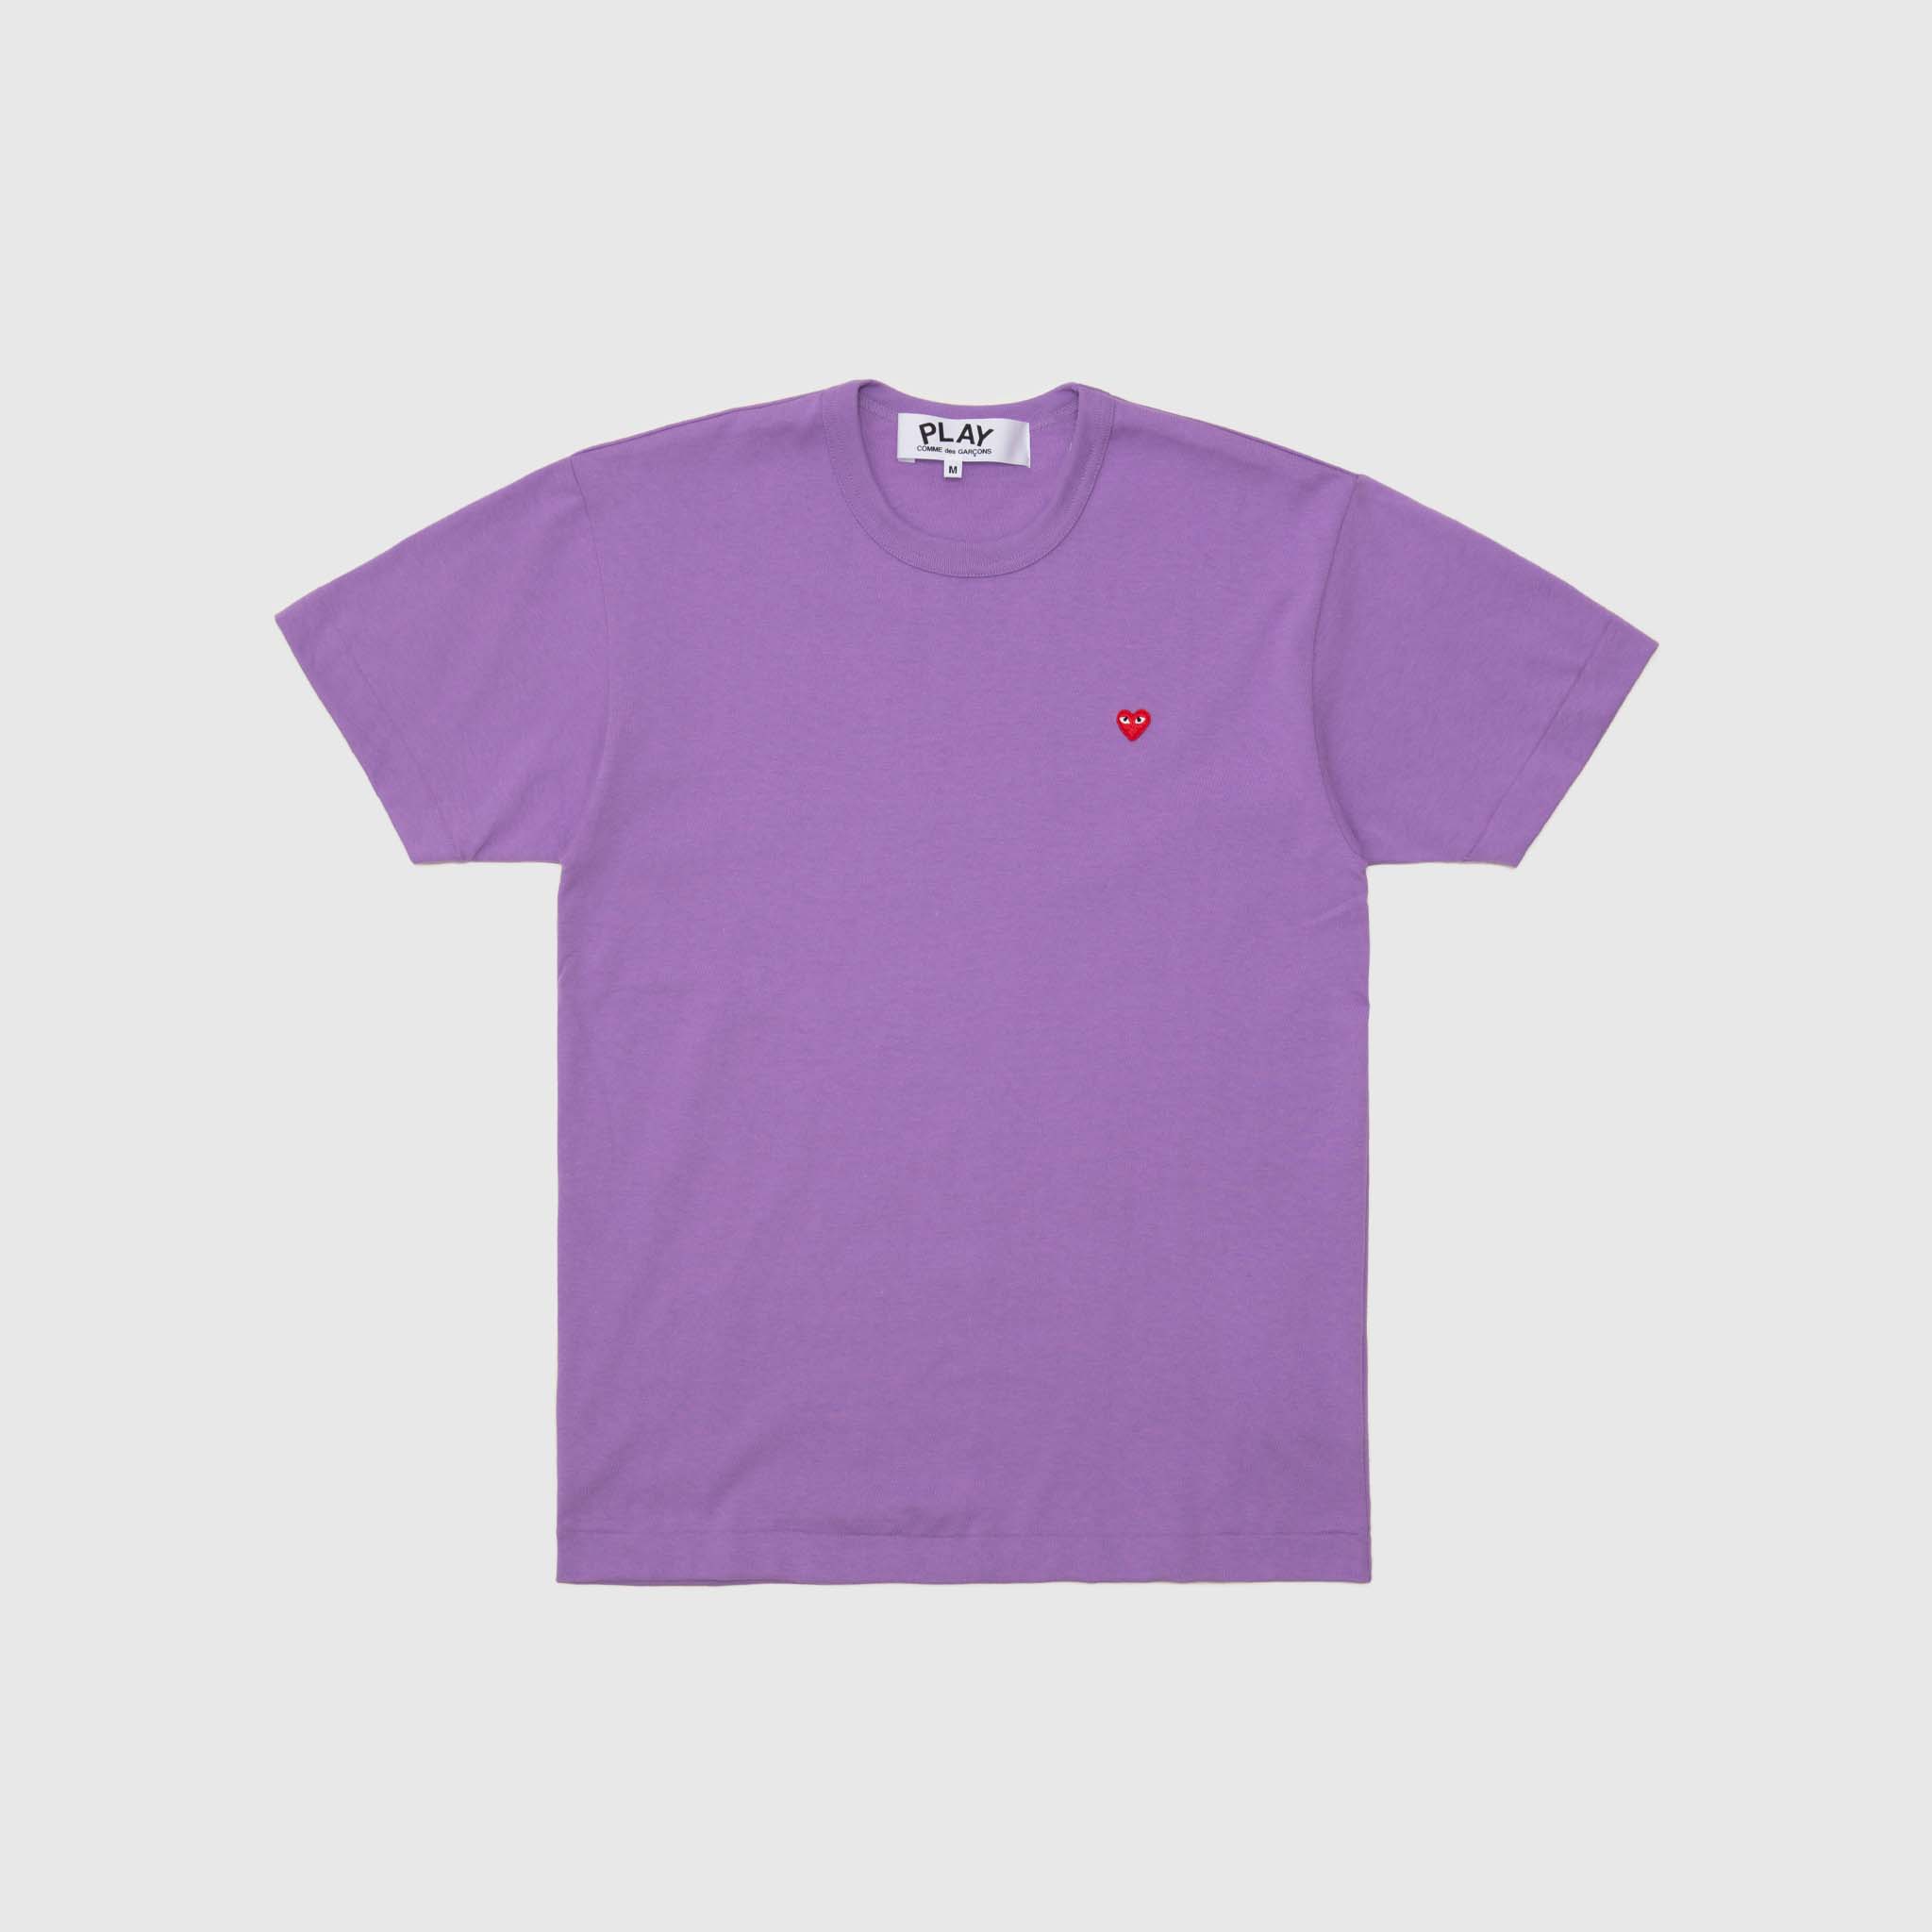 RED SMALL HEART S/S T-SHIRT